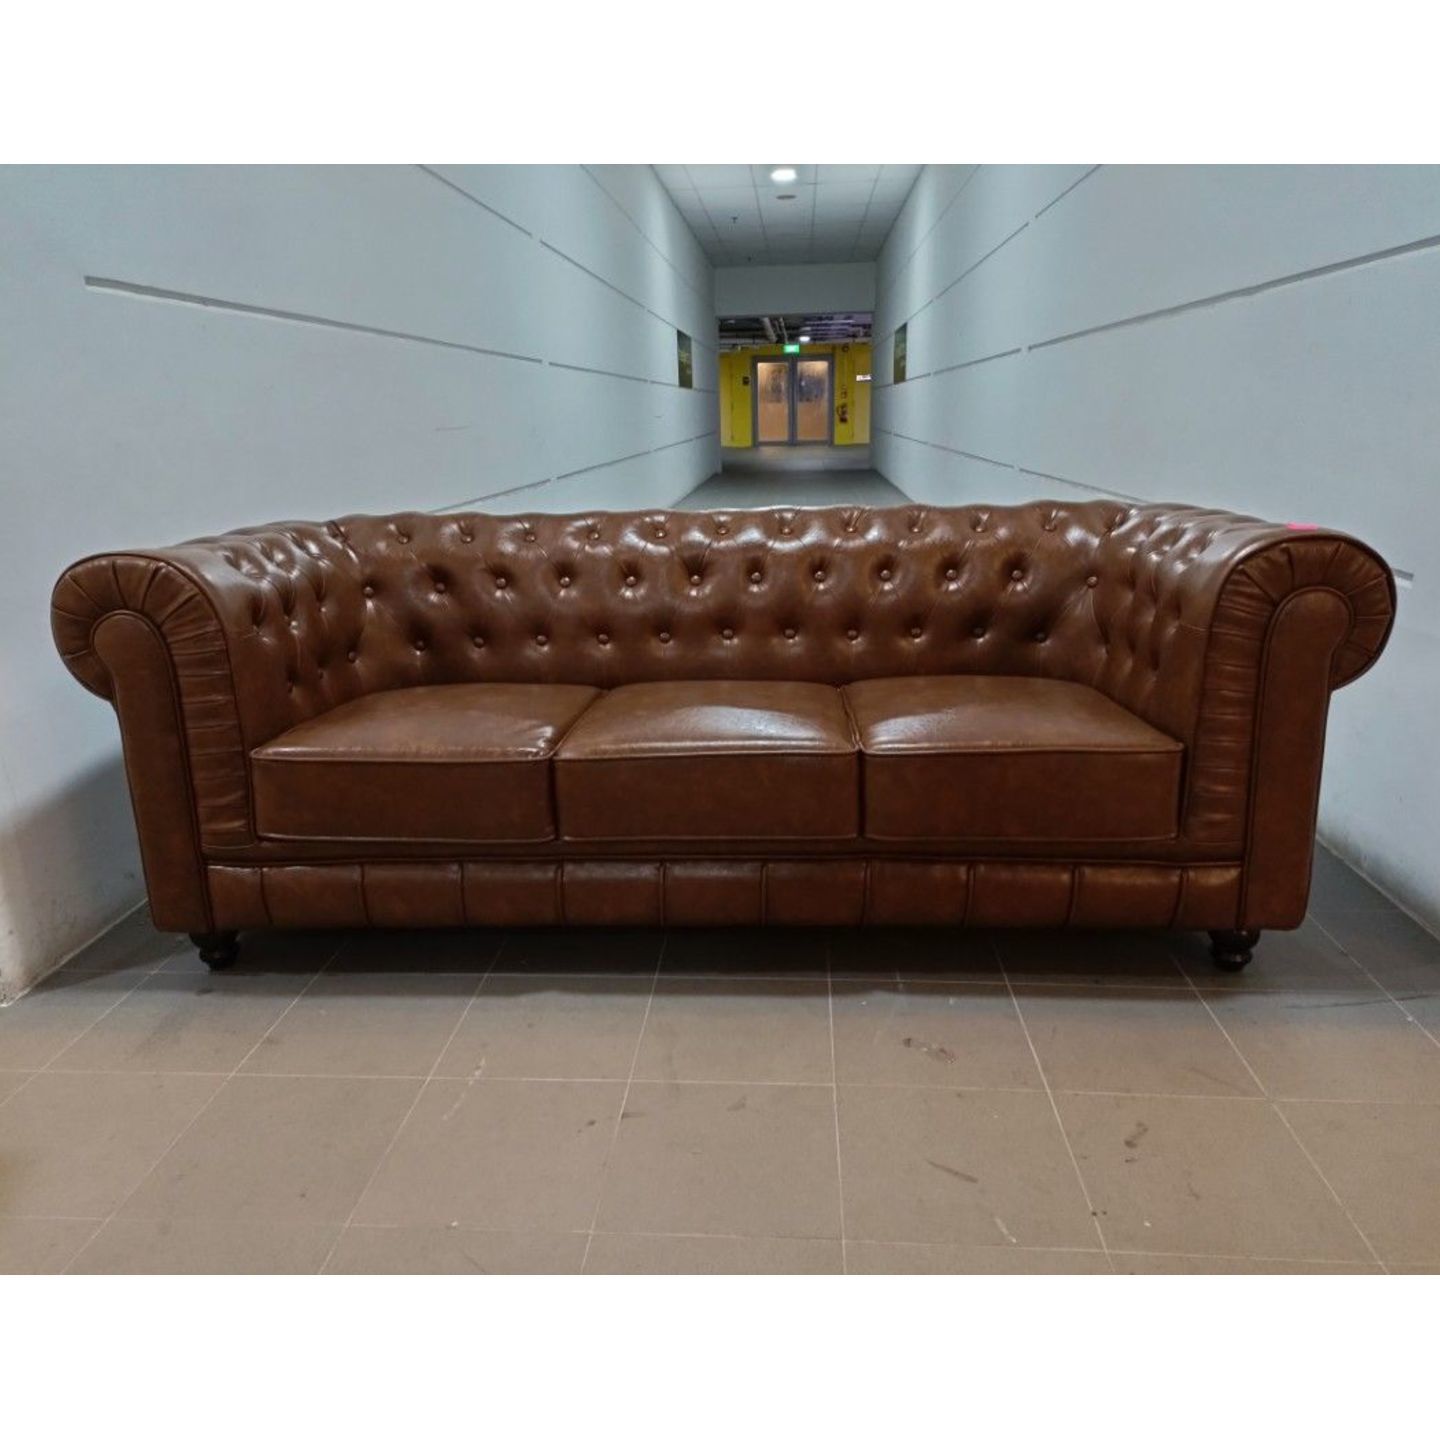 SALVADO II 3 Seater Chesterfield Sofa in CAMEL BROWN PU